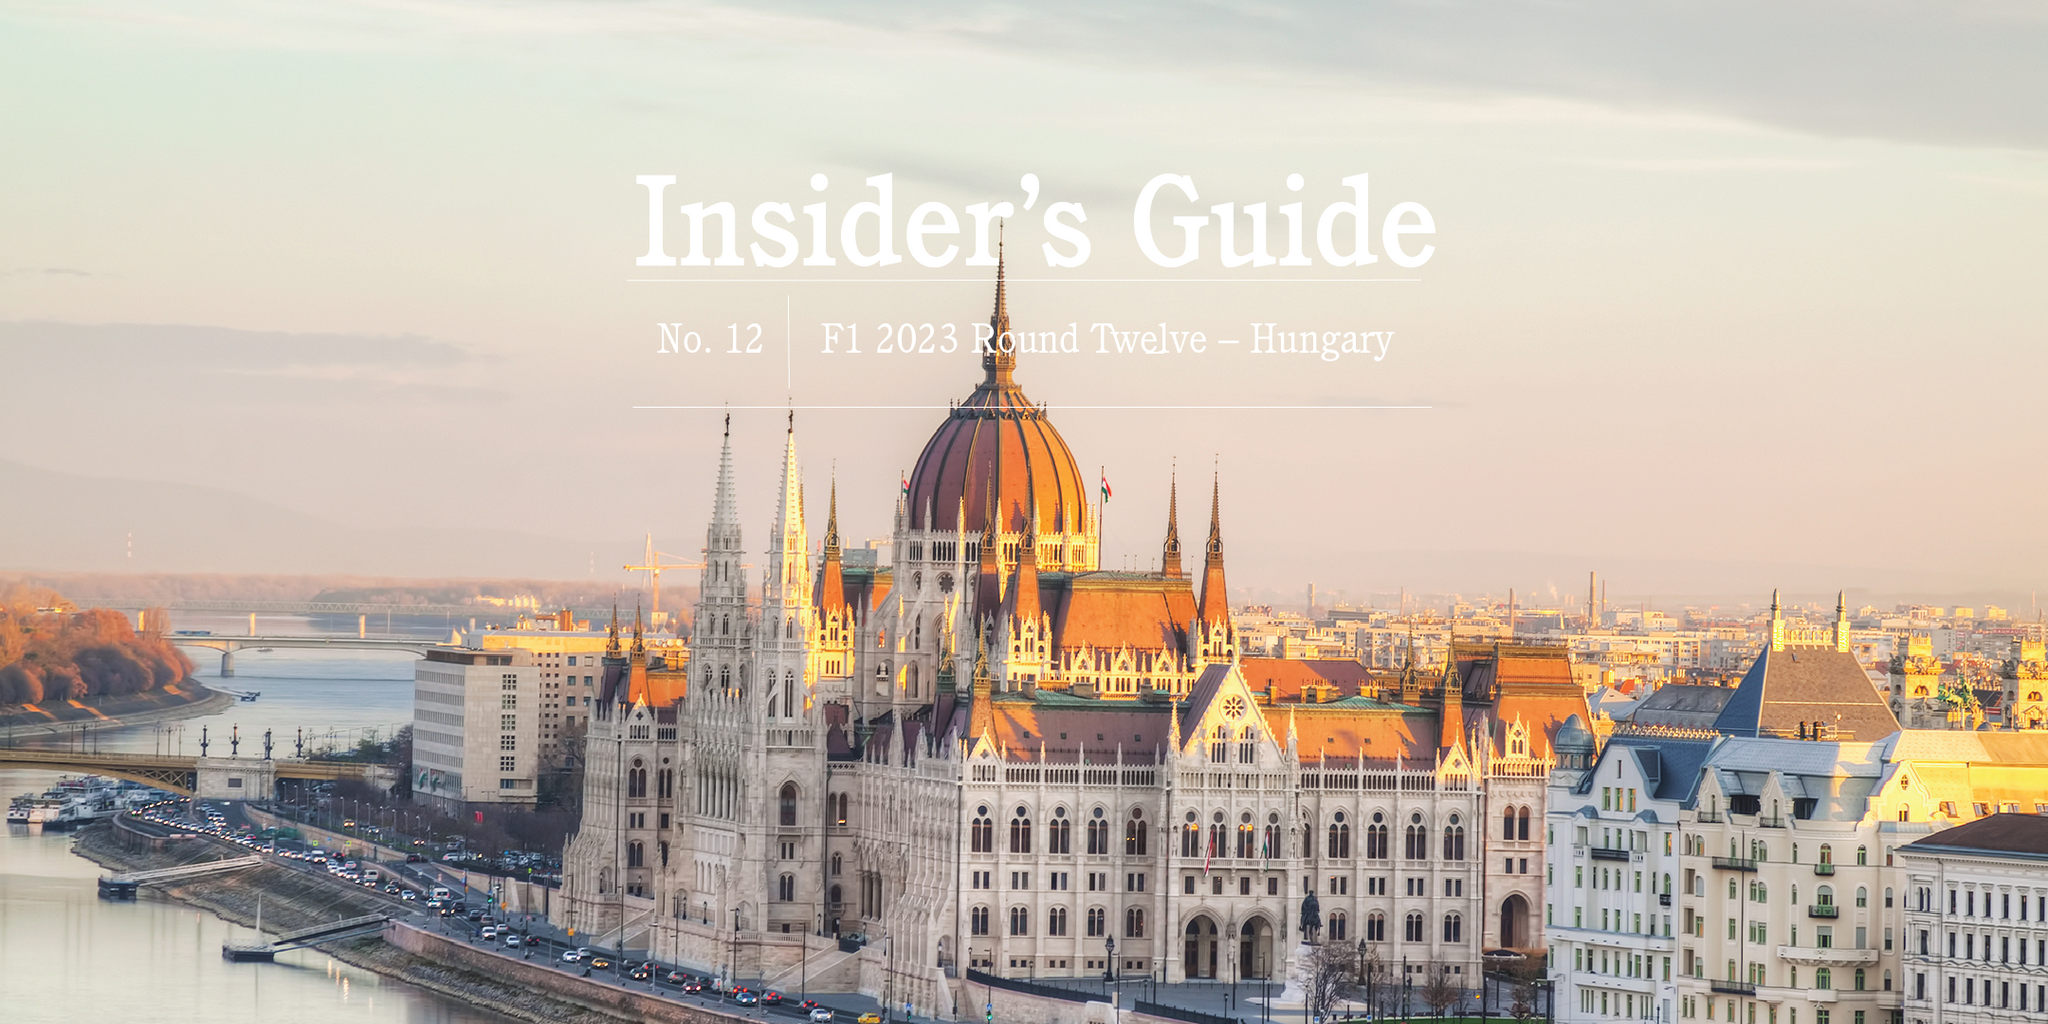 F1 2023 Insider's Guide No. 12 – Hungary - GLOBE-TROTTER